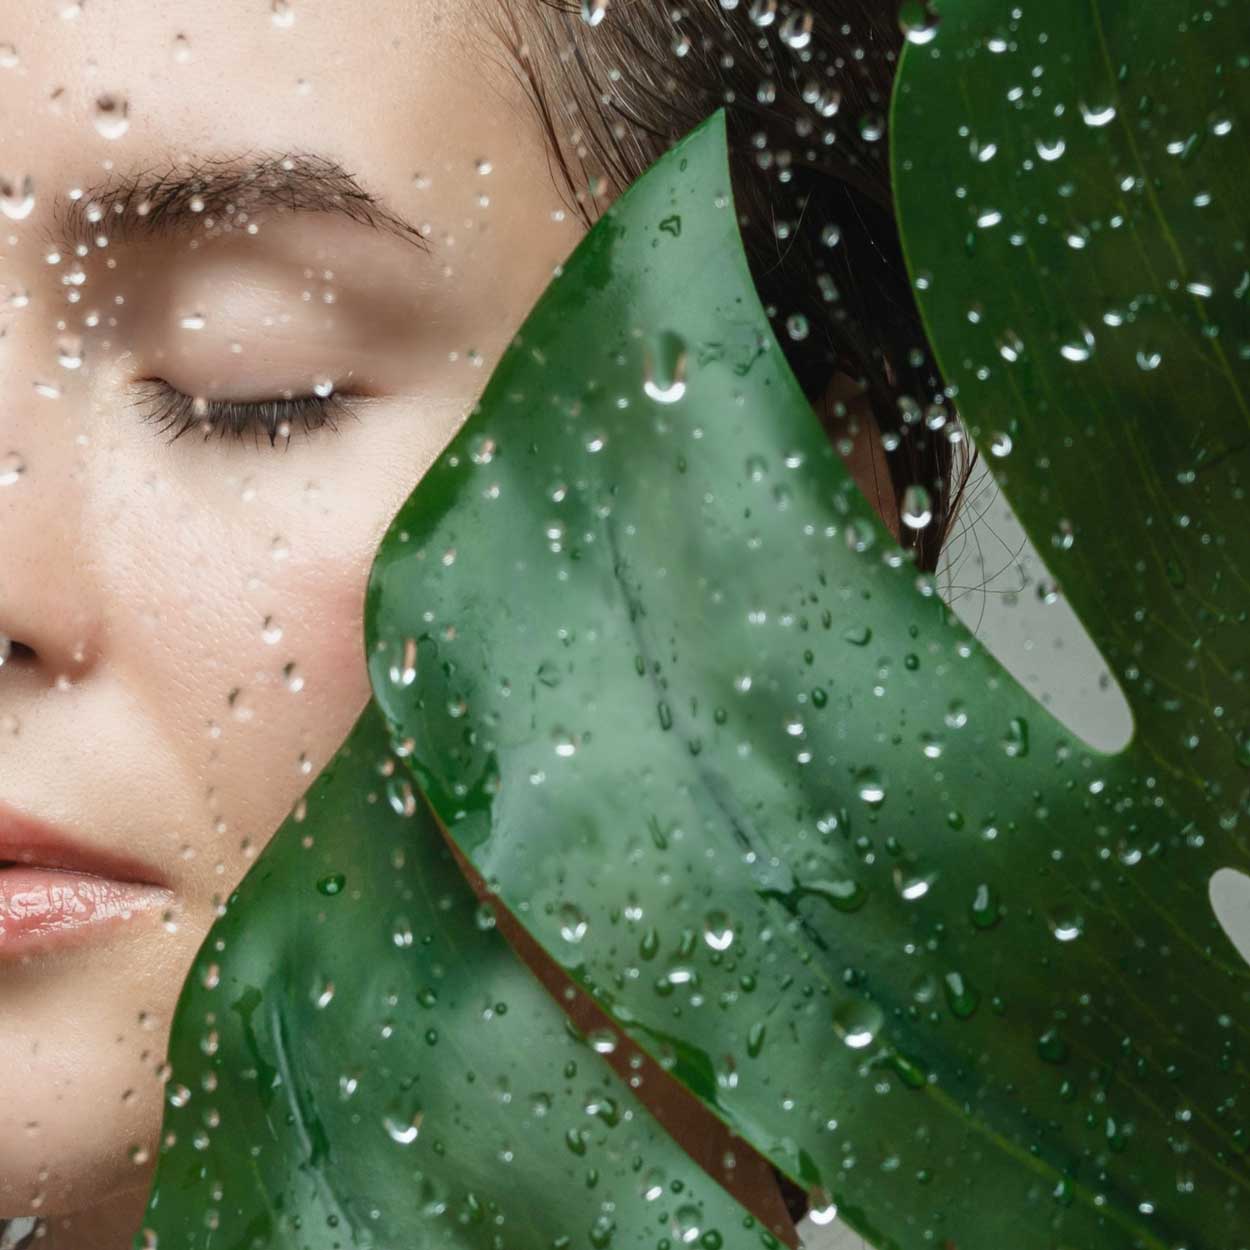 Woman's face with water and leaf - LightWater Skin Nutrition is fresh from source to skin helping to nourish skin with fresh actives